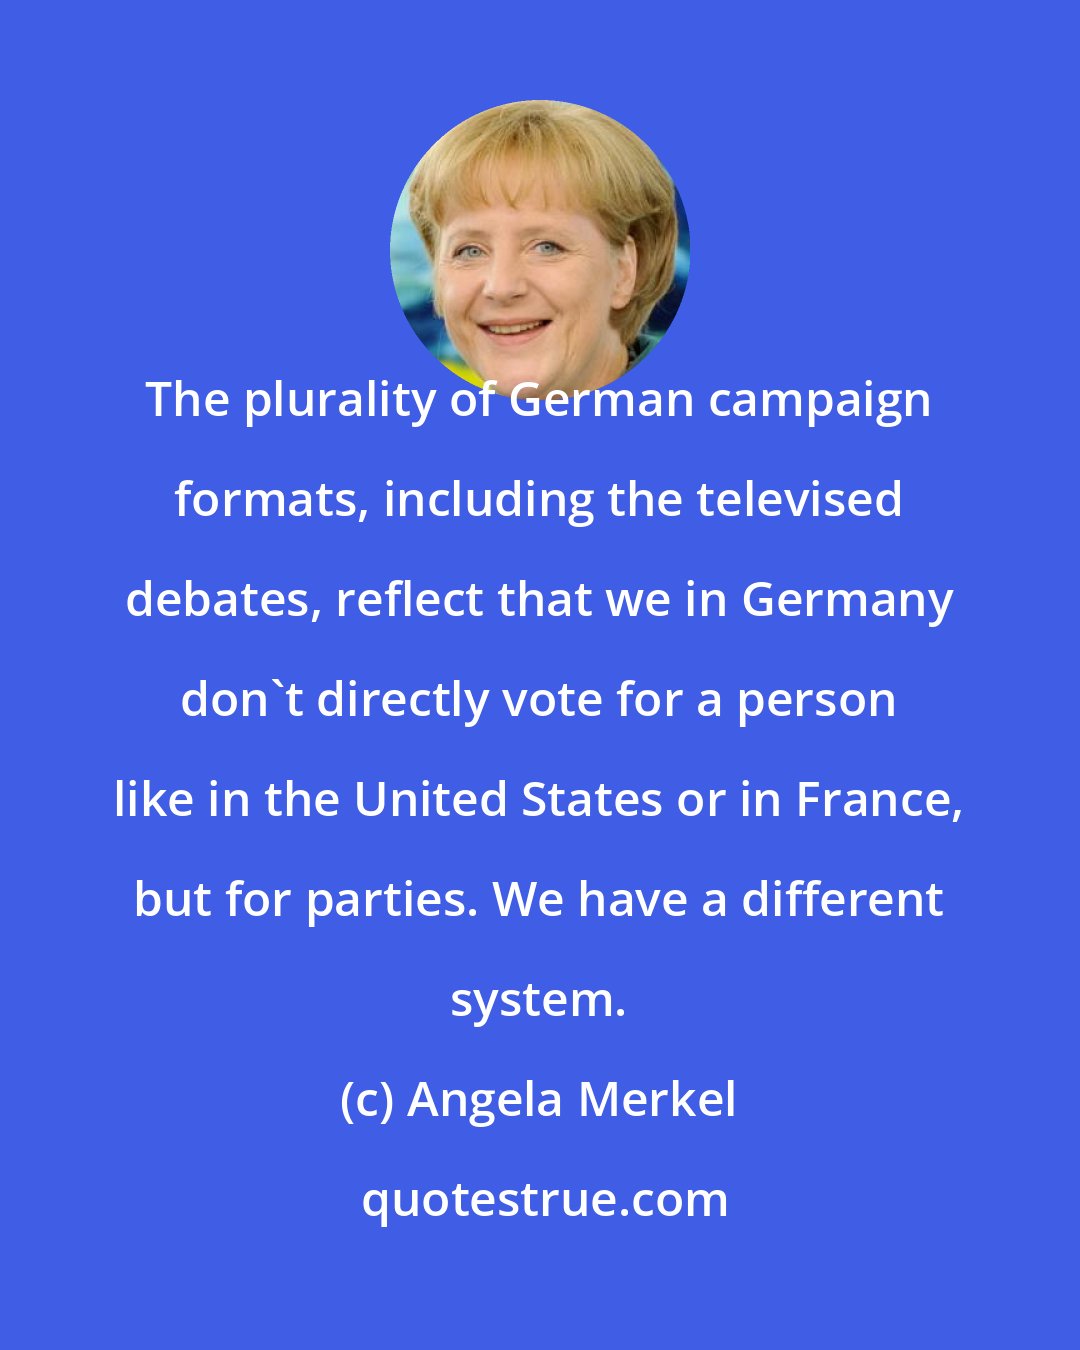 Angela Merkel: The plurality of German campaign formats, including the televised debates, reflect that we in Germany don't directly vote for a person like in the United States or in France, but for parties. We have a different system.